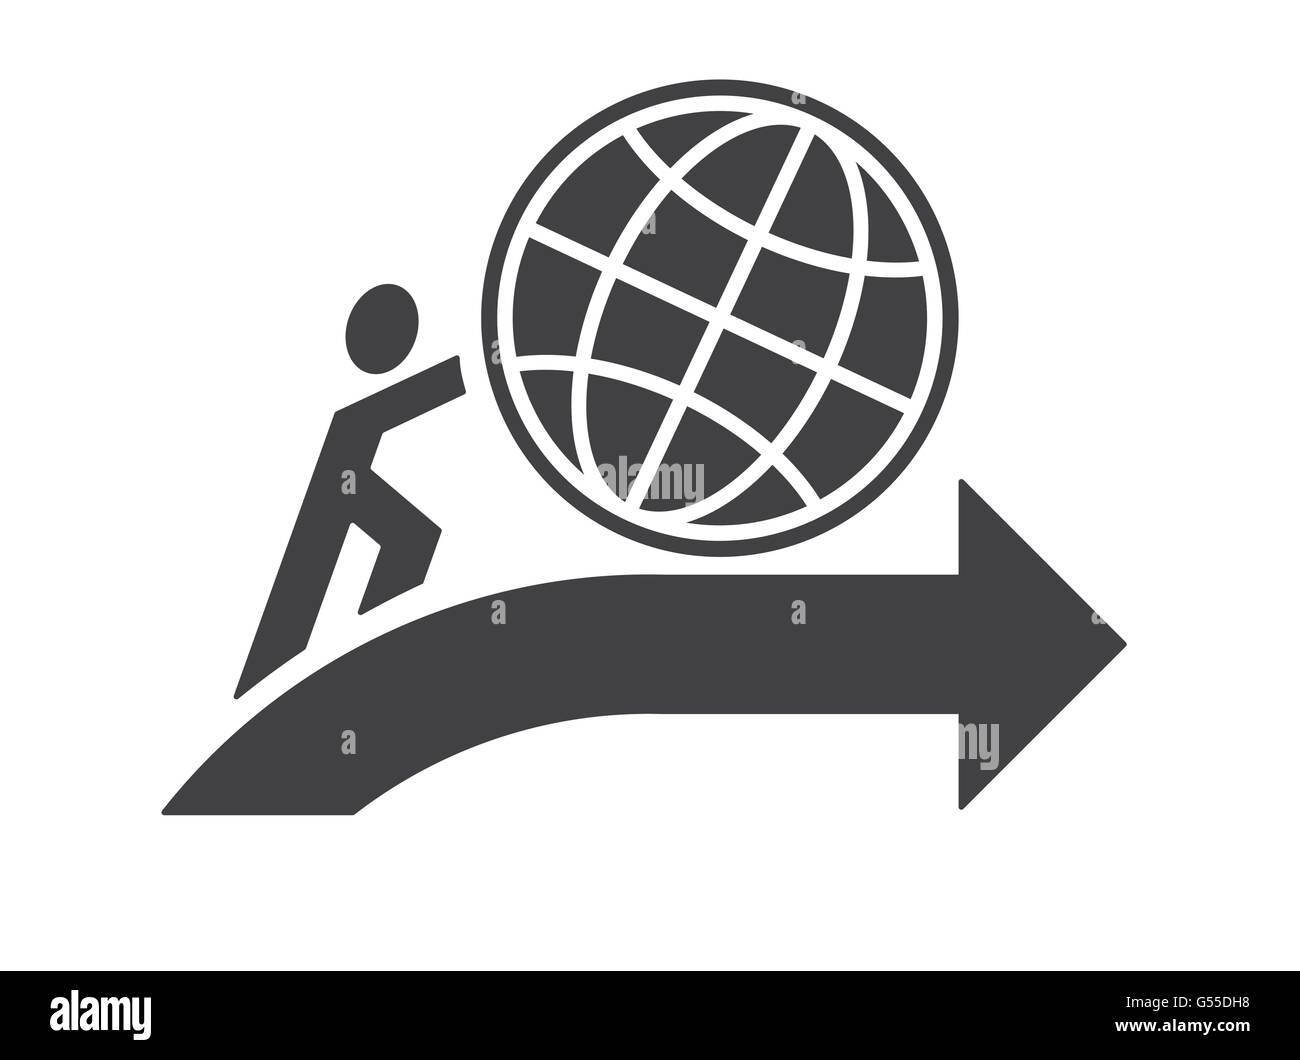 abstract human symbol pushing earth up as moving progress ahead concept vector illustration isolated on white Stock Vector